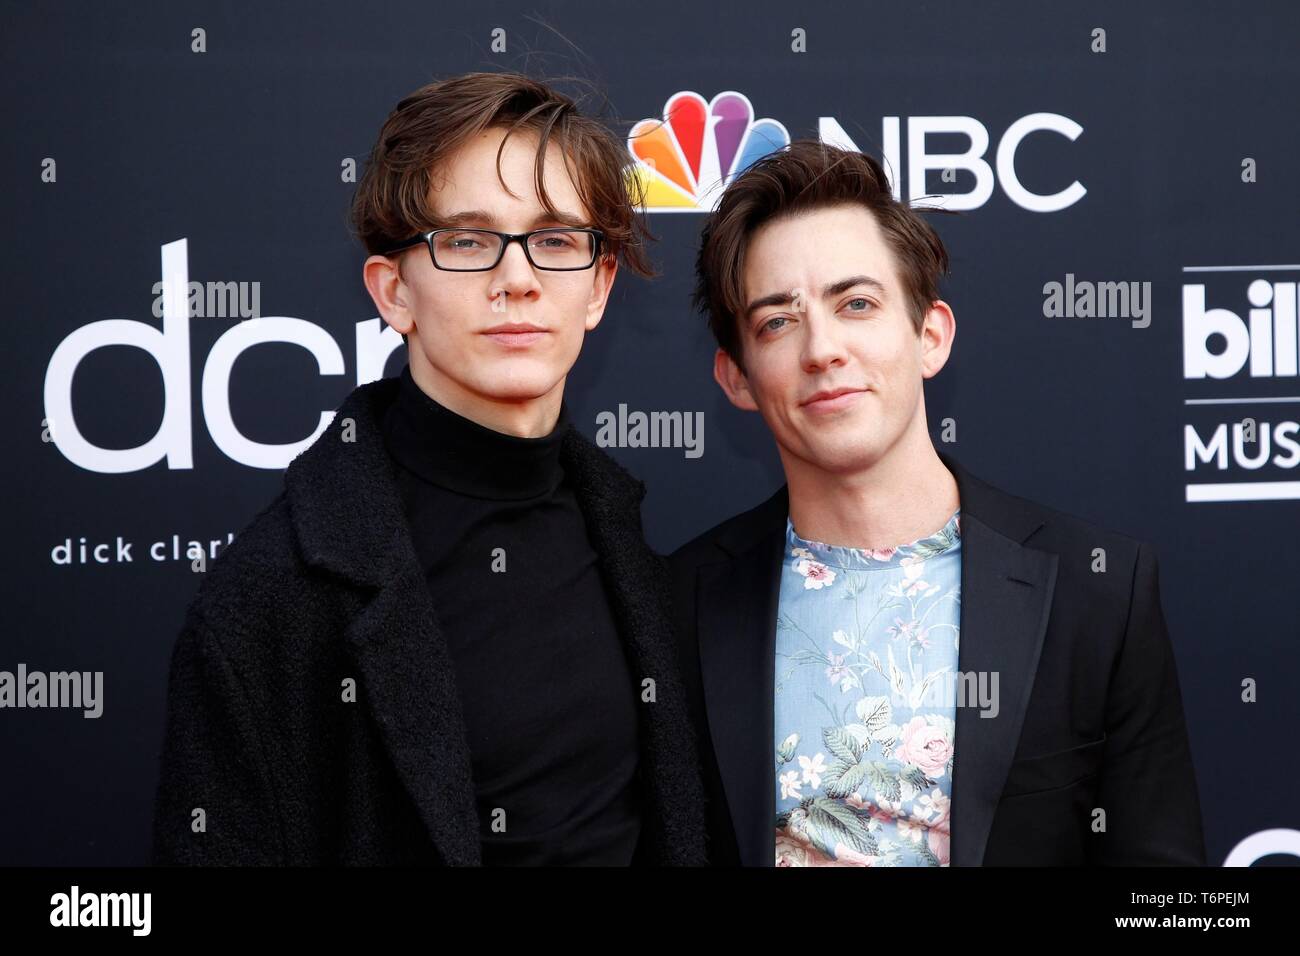 Las Vegas, NV, USA. 1st May, 2019. Austin McKenzie, Kevin McHale at arrivals for 2019 Billboard Music Awards - Arrivals 3, MGM Grand Garden Arena, Las Vegas, NV May 1, 2019. Credit: JA/Everett Collection/Alamy Live News Stock Photo